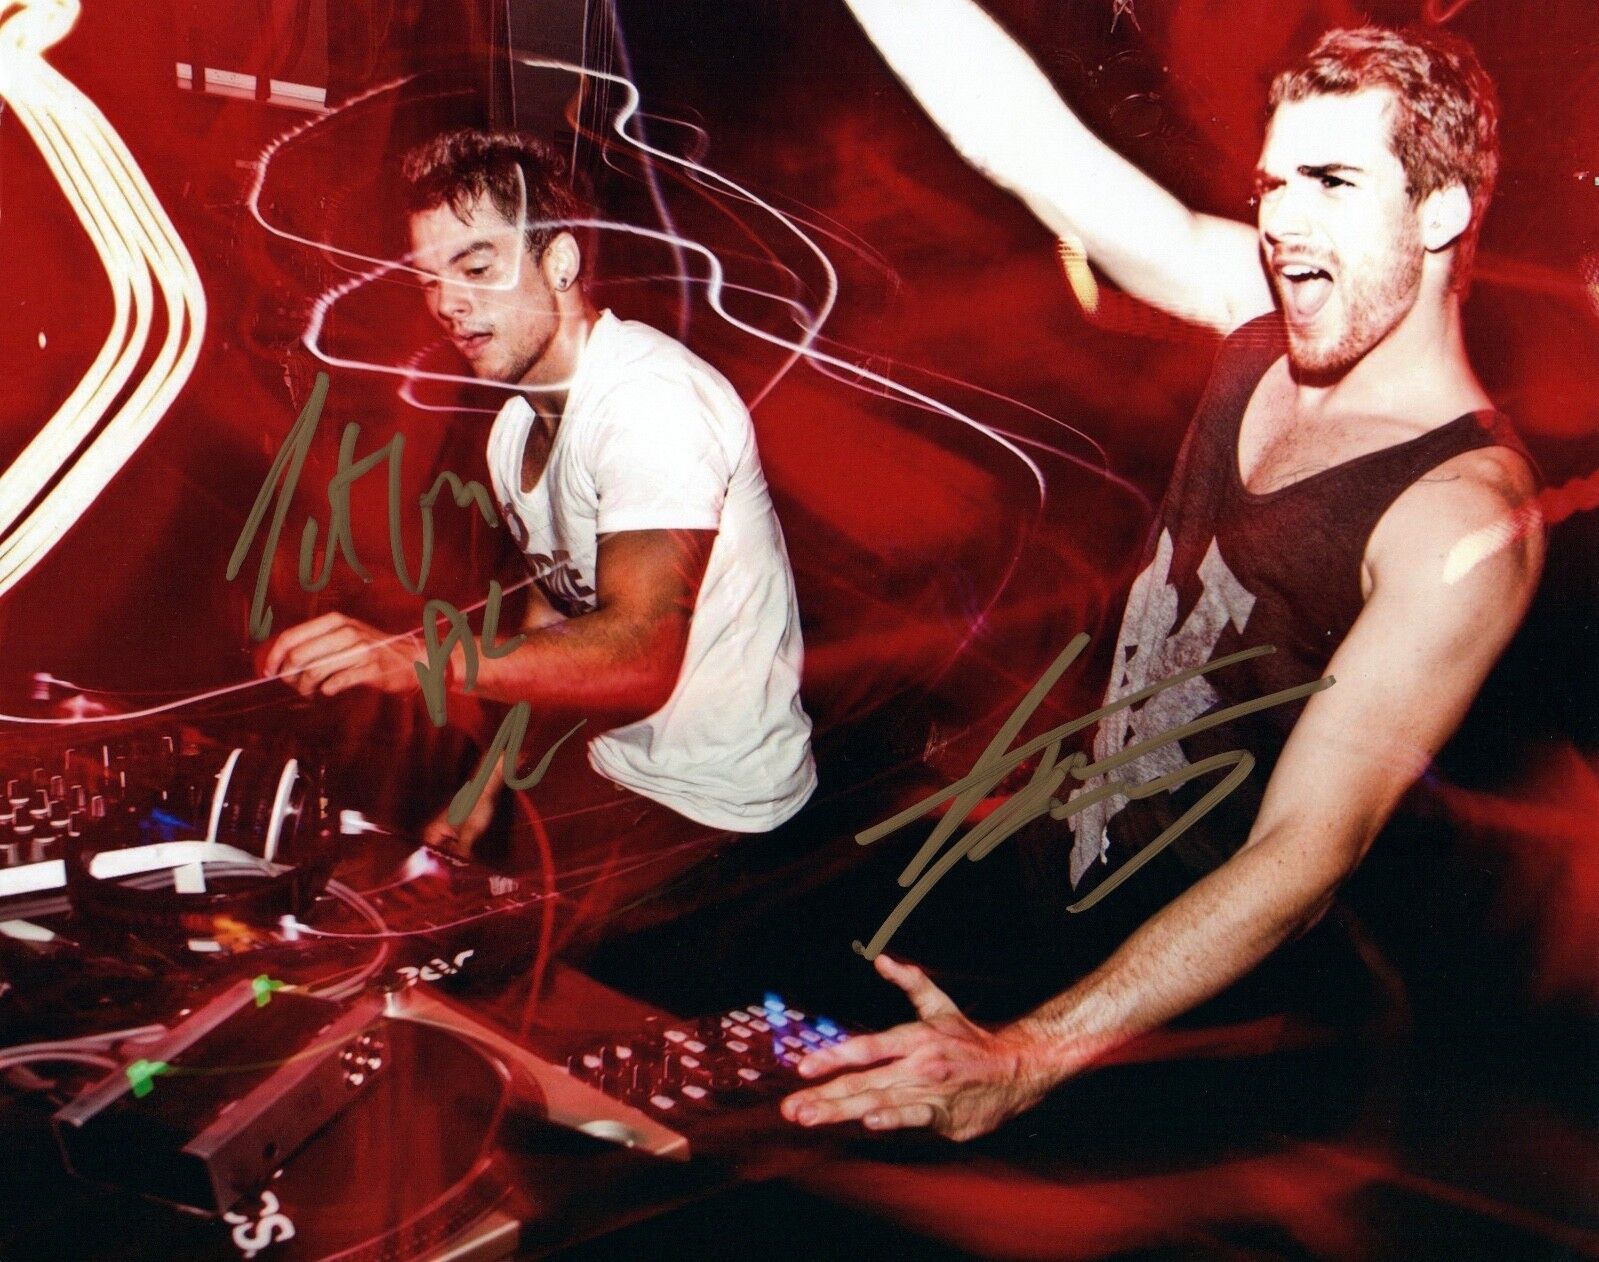 Adventure Club Signed Autographed 8x10 Photo Poster painting EMD DJ Group VD